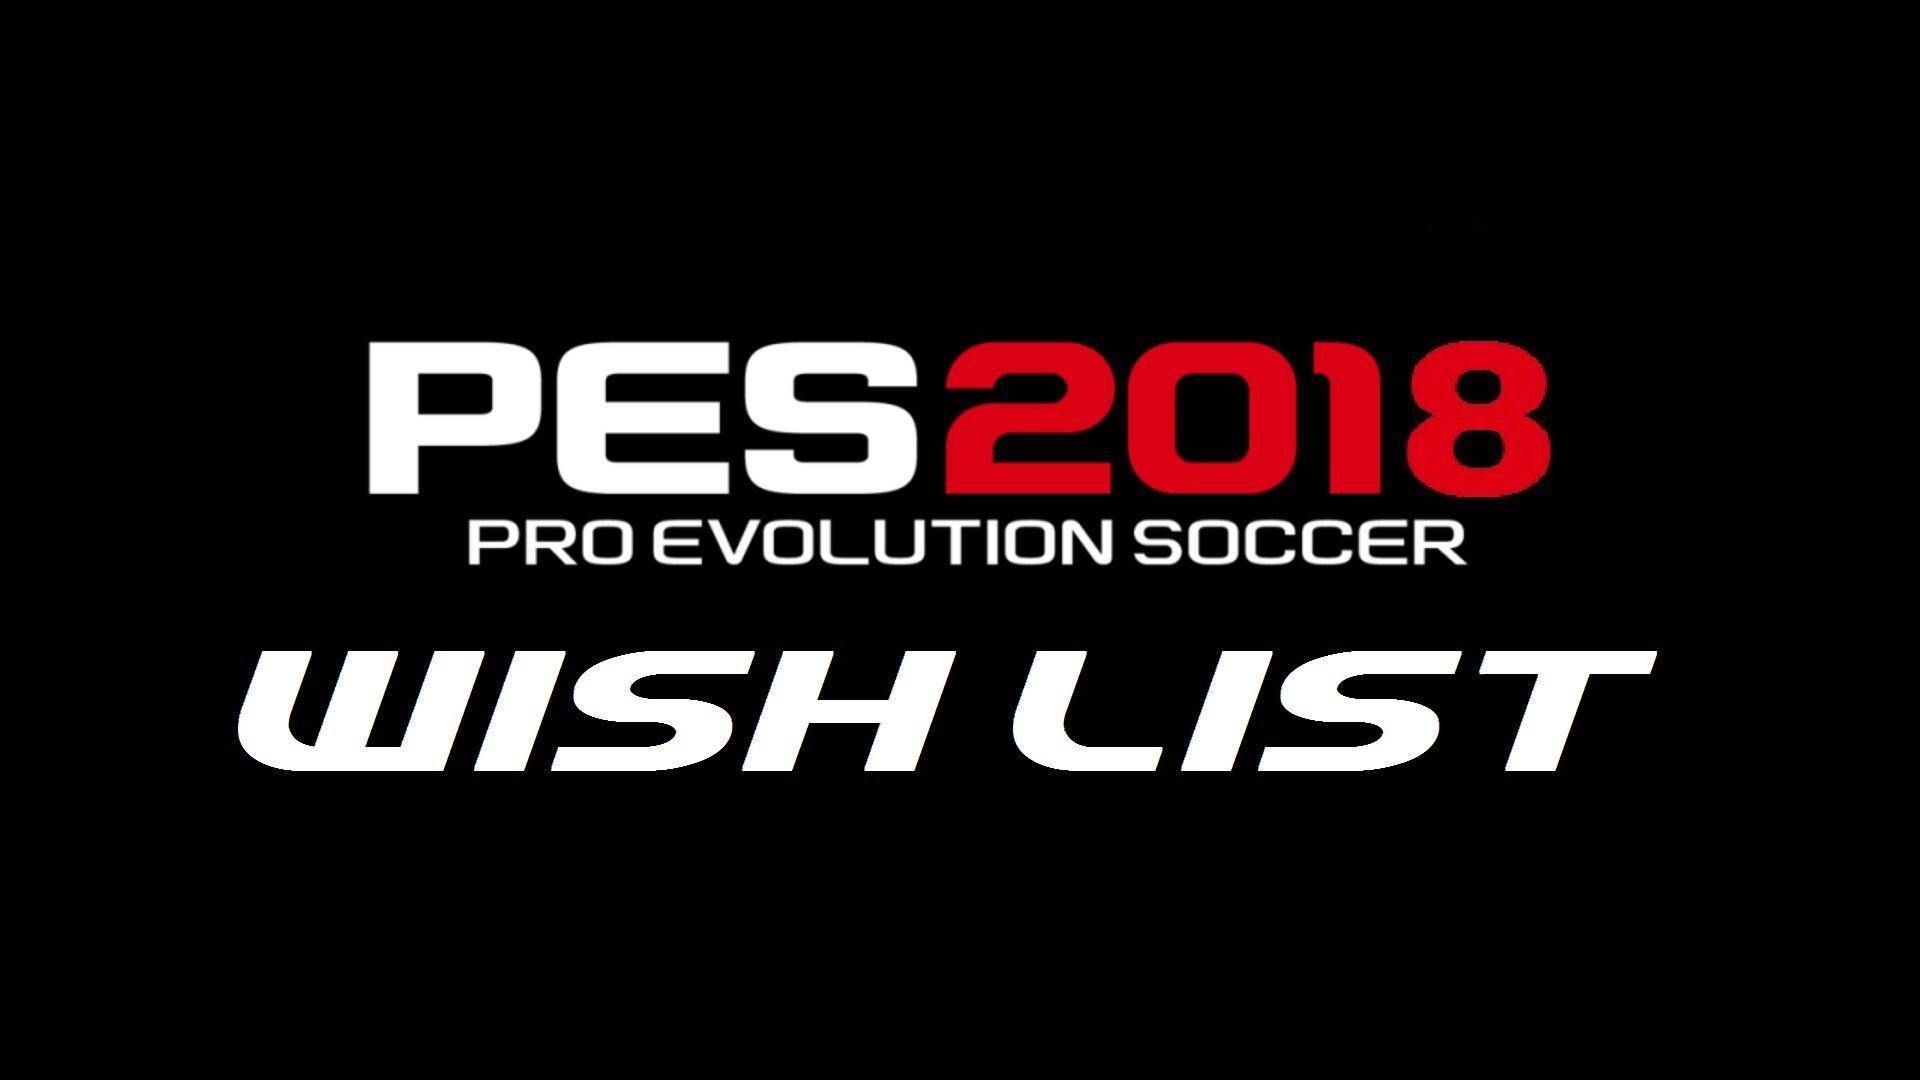 PES 2018 Wish List Can Be Improved